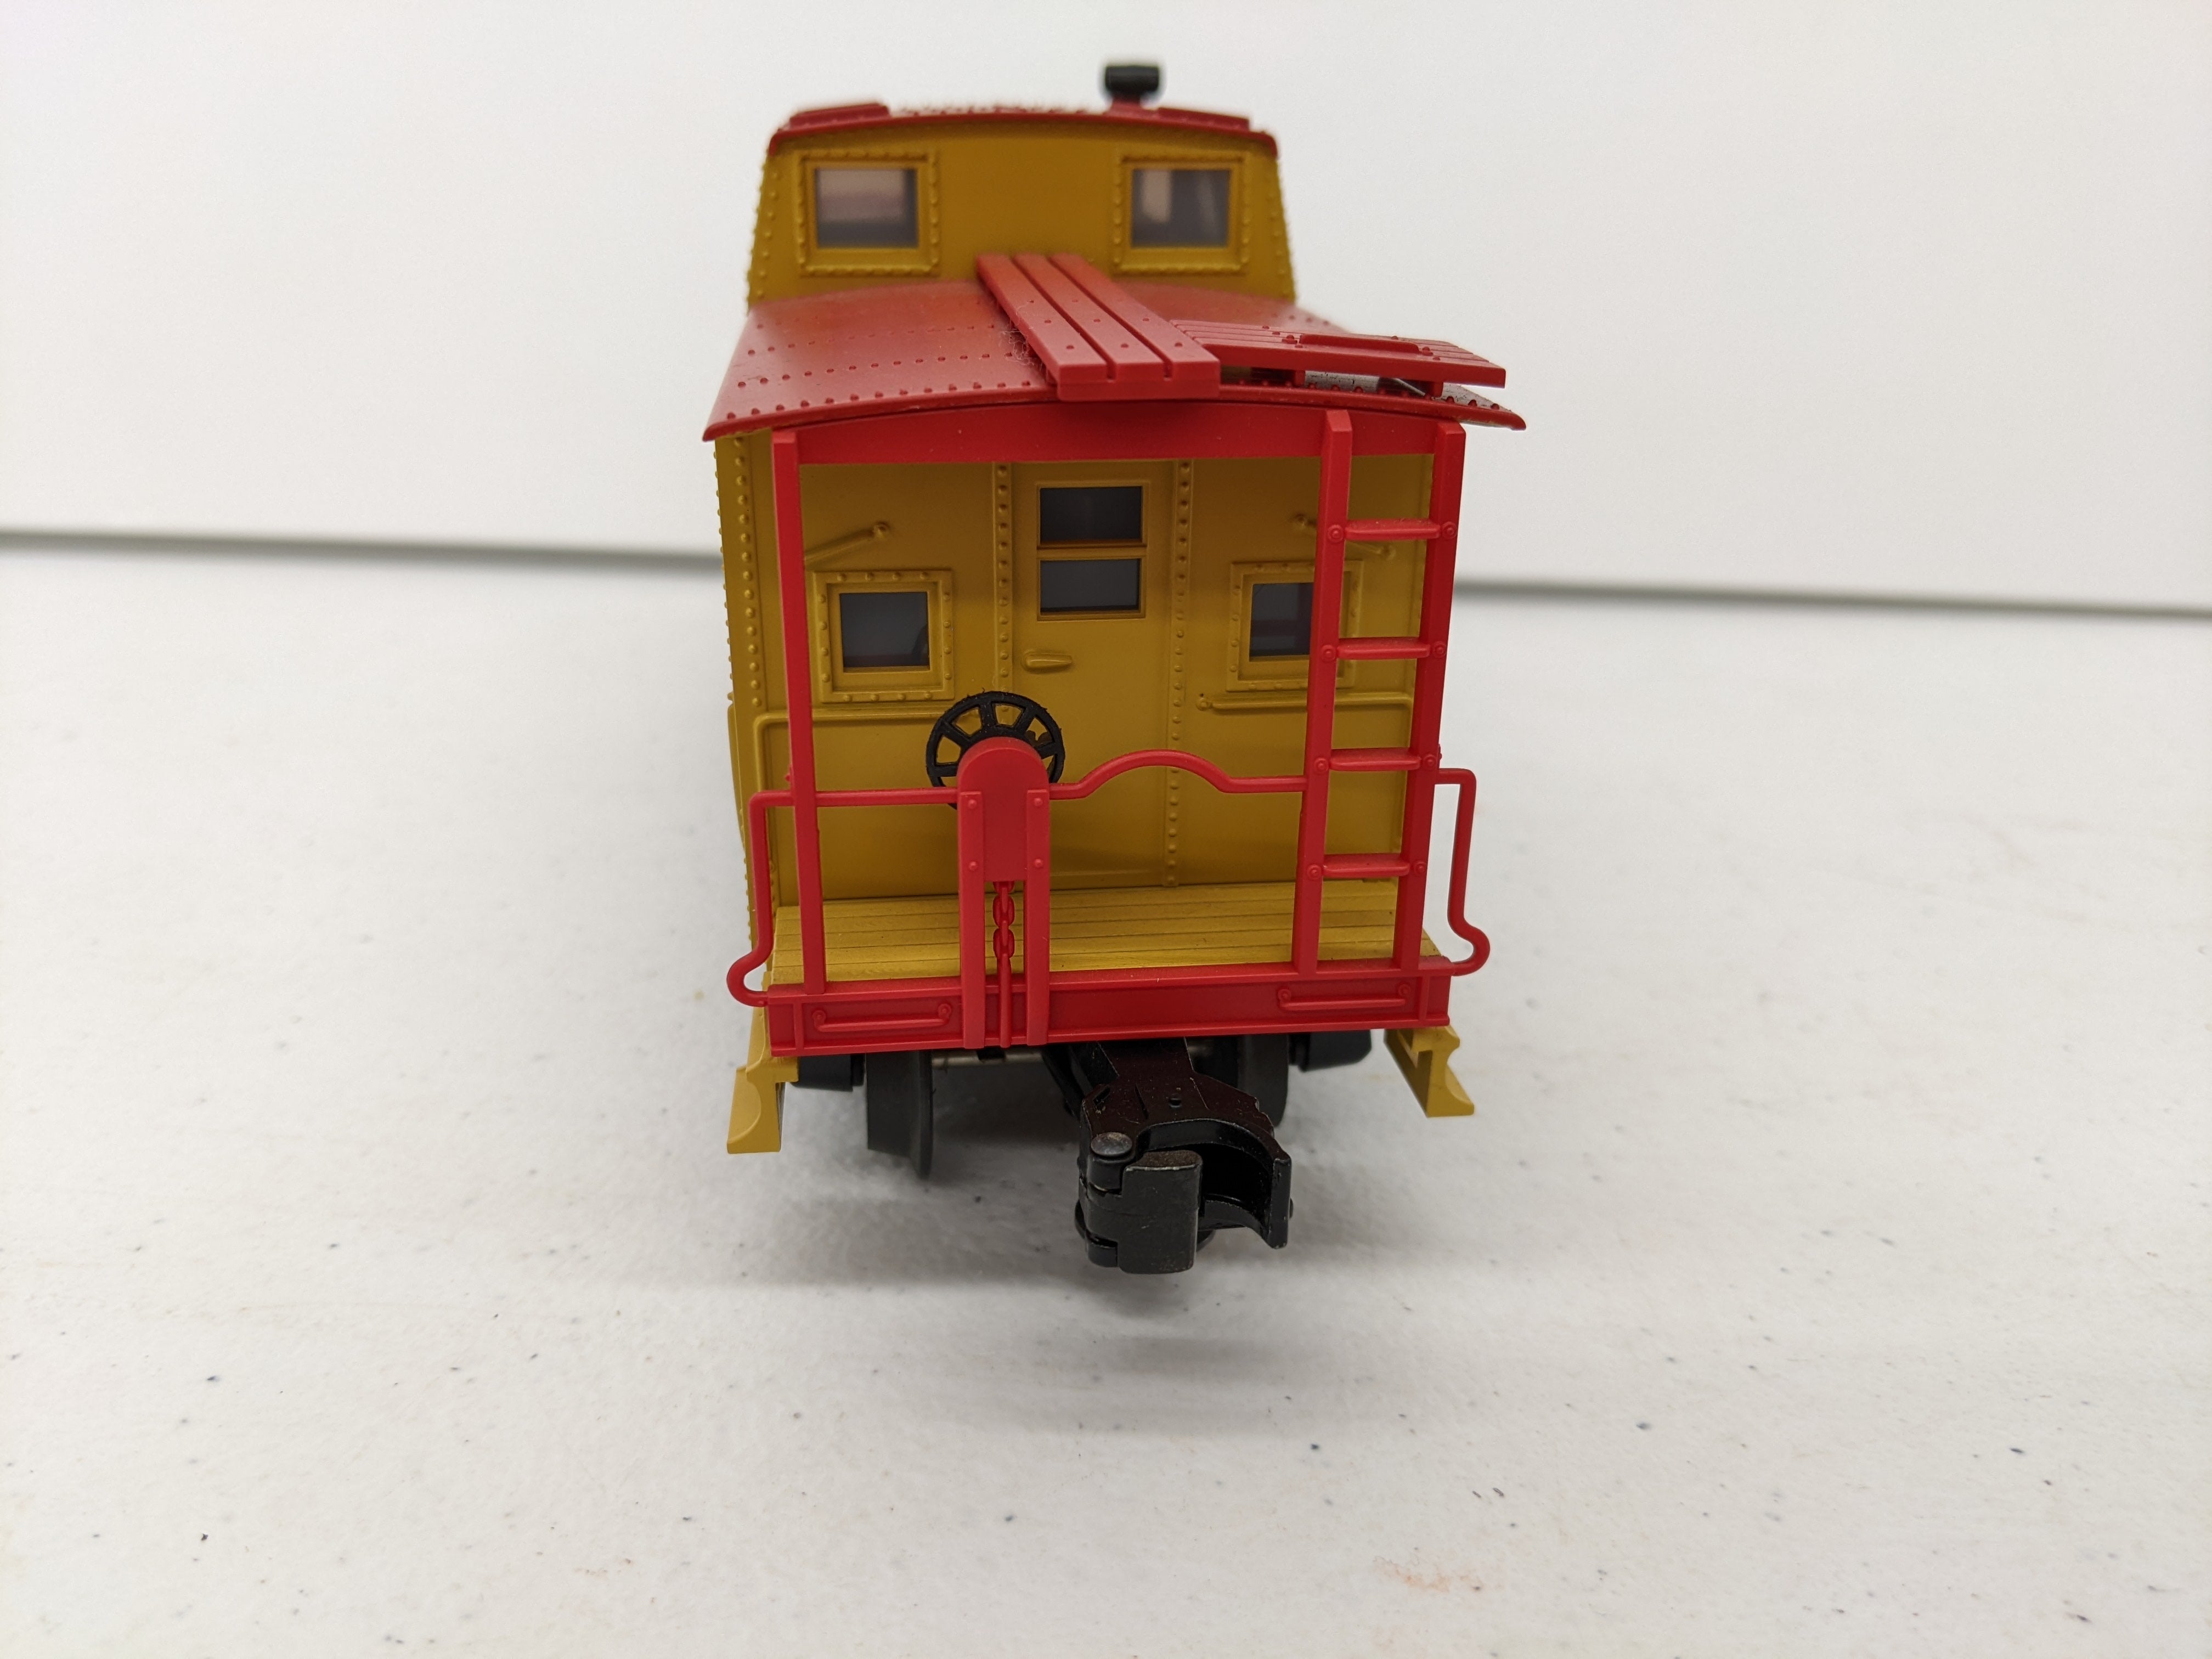 USED MTH Rail King 30-7767 O Scale, Steel Caboose, Union Pacific UP #25506